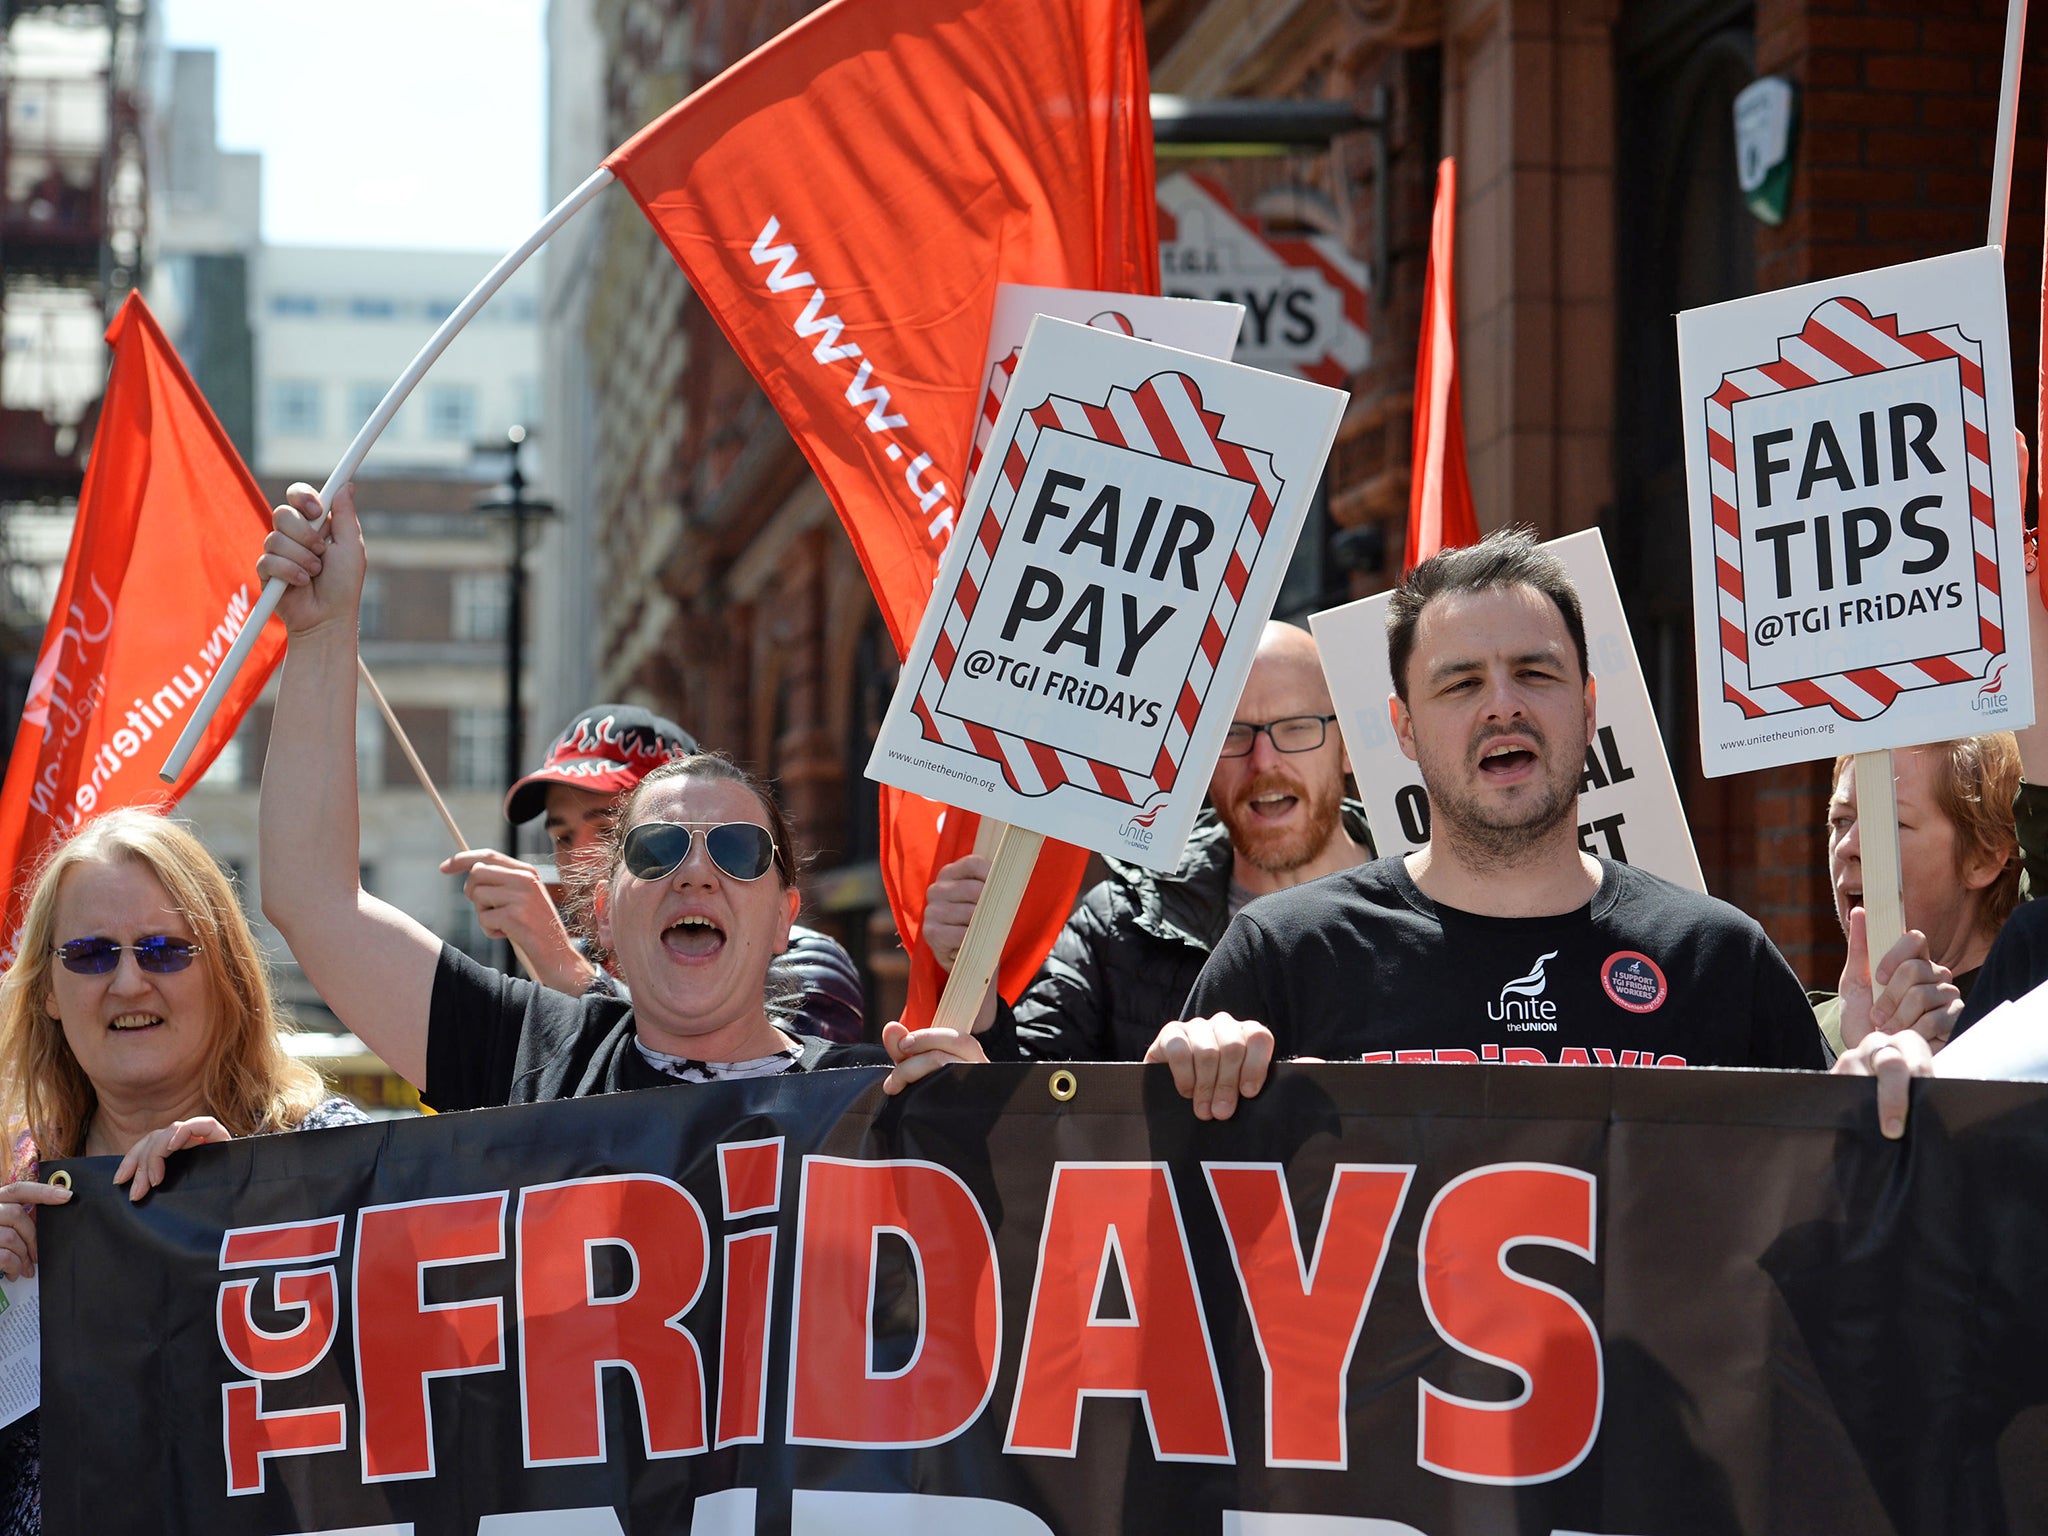 Workers from the Covent Garden branch of TGI Fridays on a picket line outside the restaurant